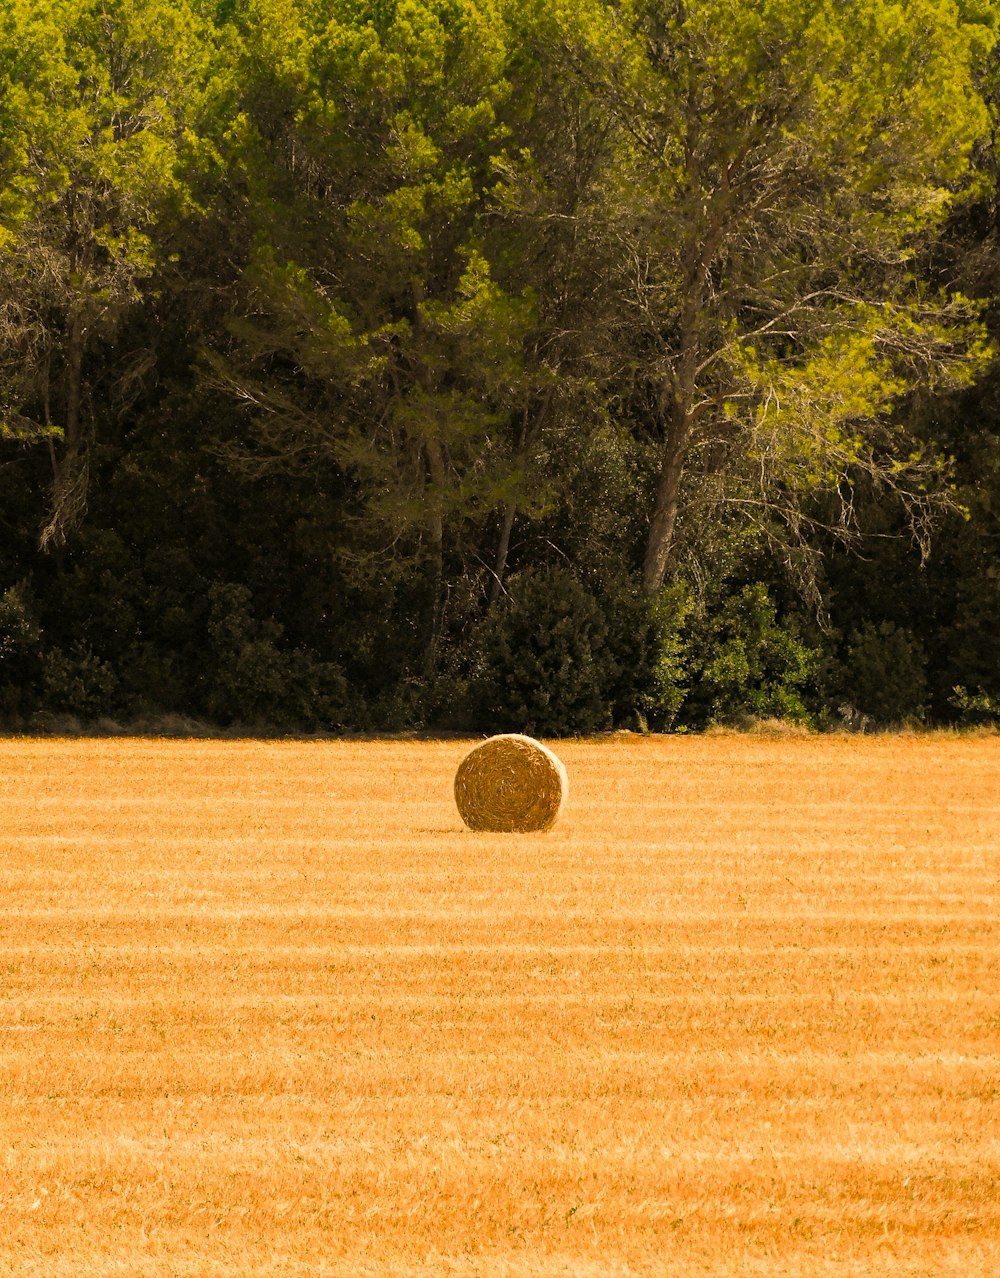 a bale of hay in a field with trees in the background